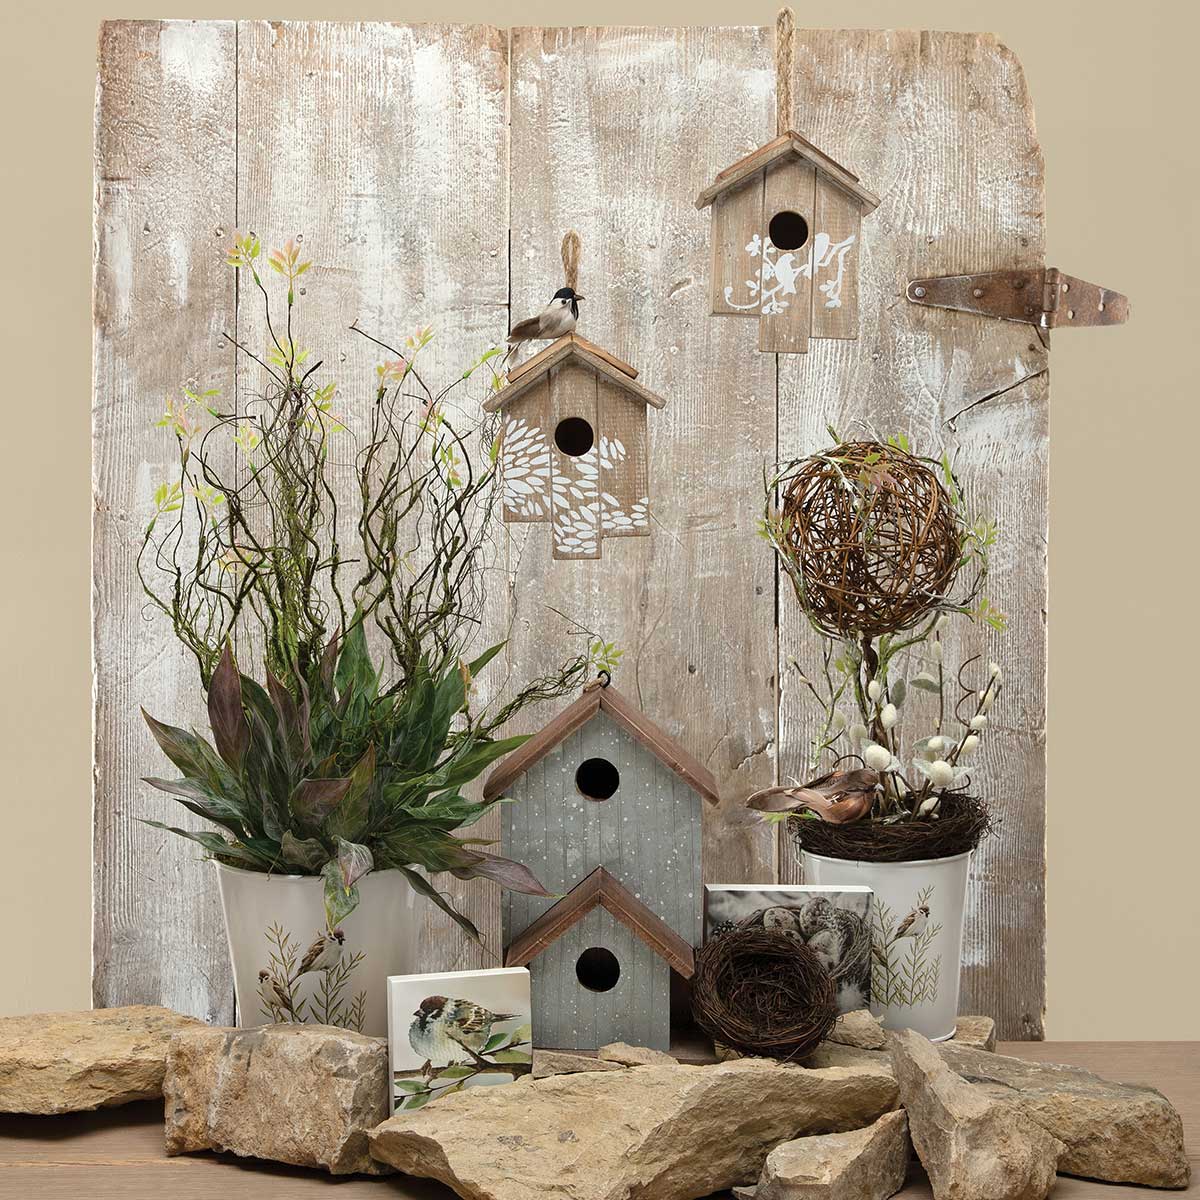 BIRDHOUSE WITH BIRD STENCIL 6IN X 4IN X 7.25IN WOOD - Click Image to Close